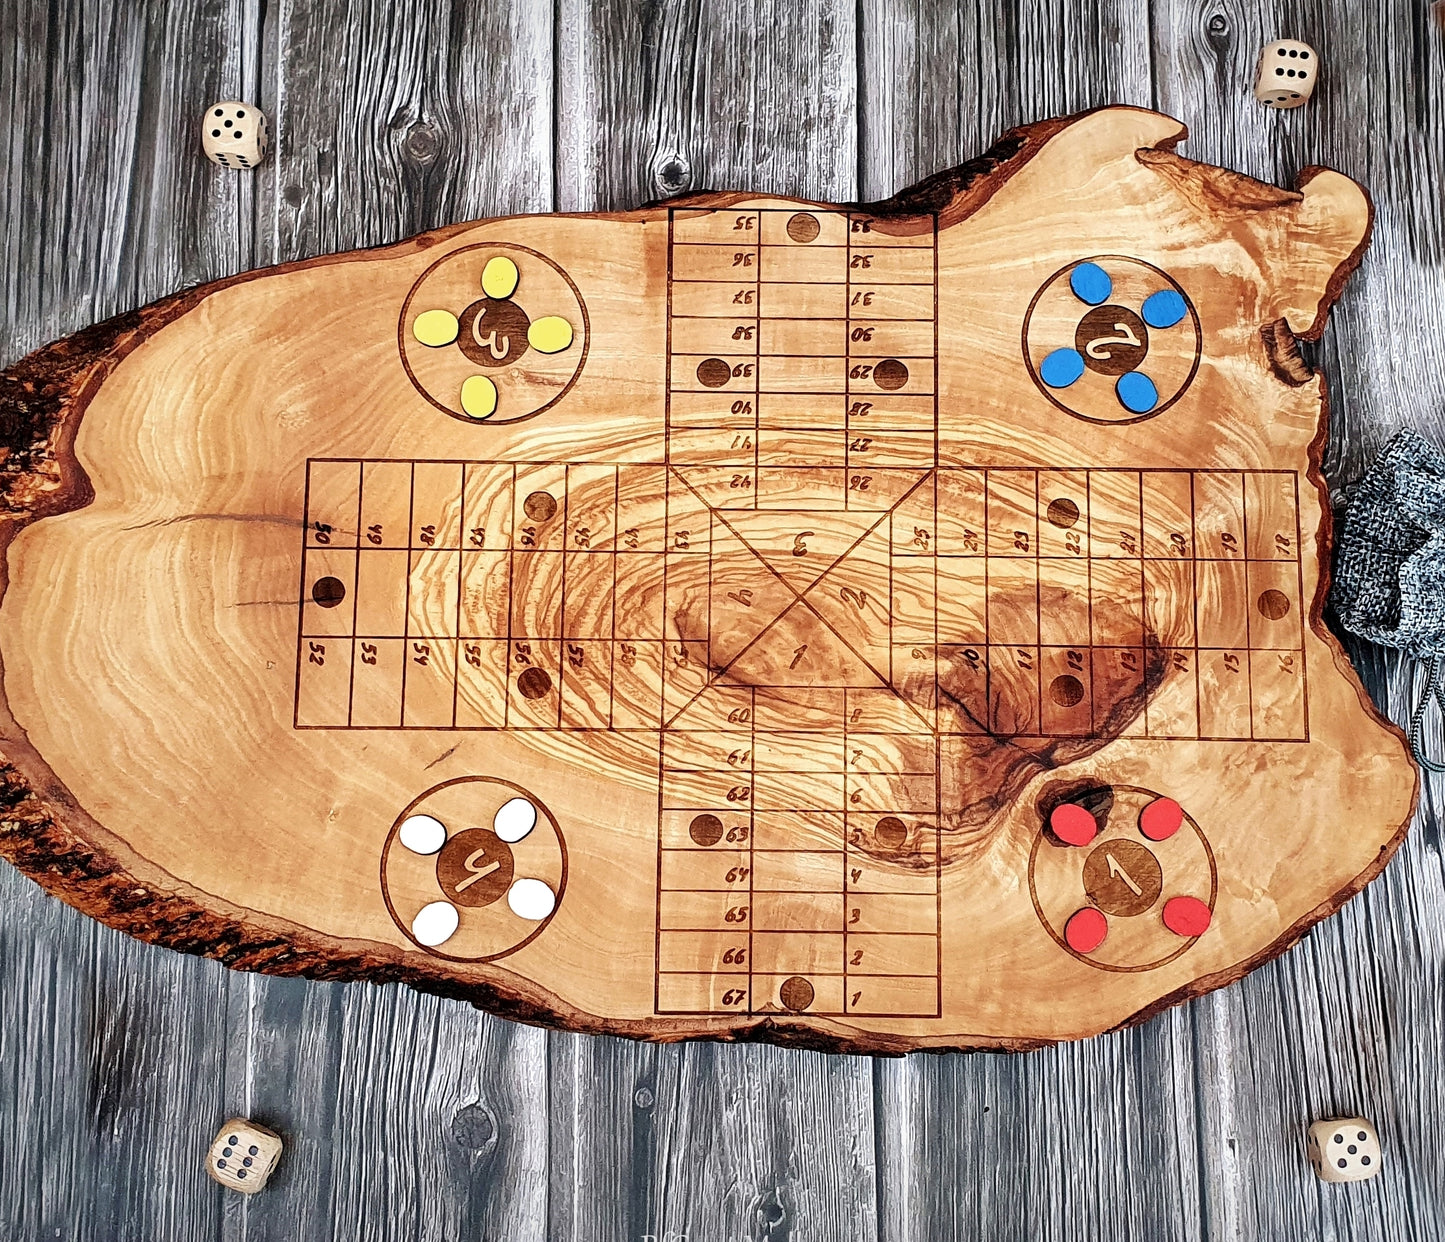 Ludo Game Rustic Olive Wood Board, Olive Wood Parcheesi Handmade Author Design, Aggravation Board Game, Ludo Game  Wooden Table Board Games